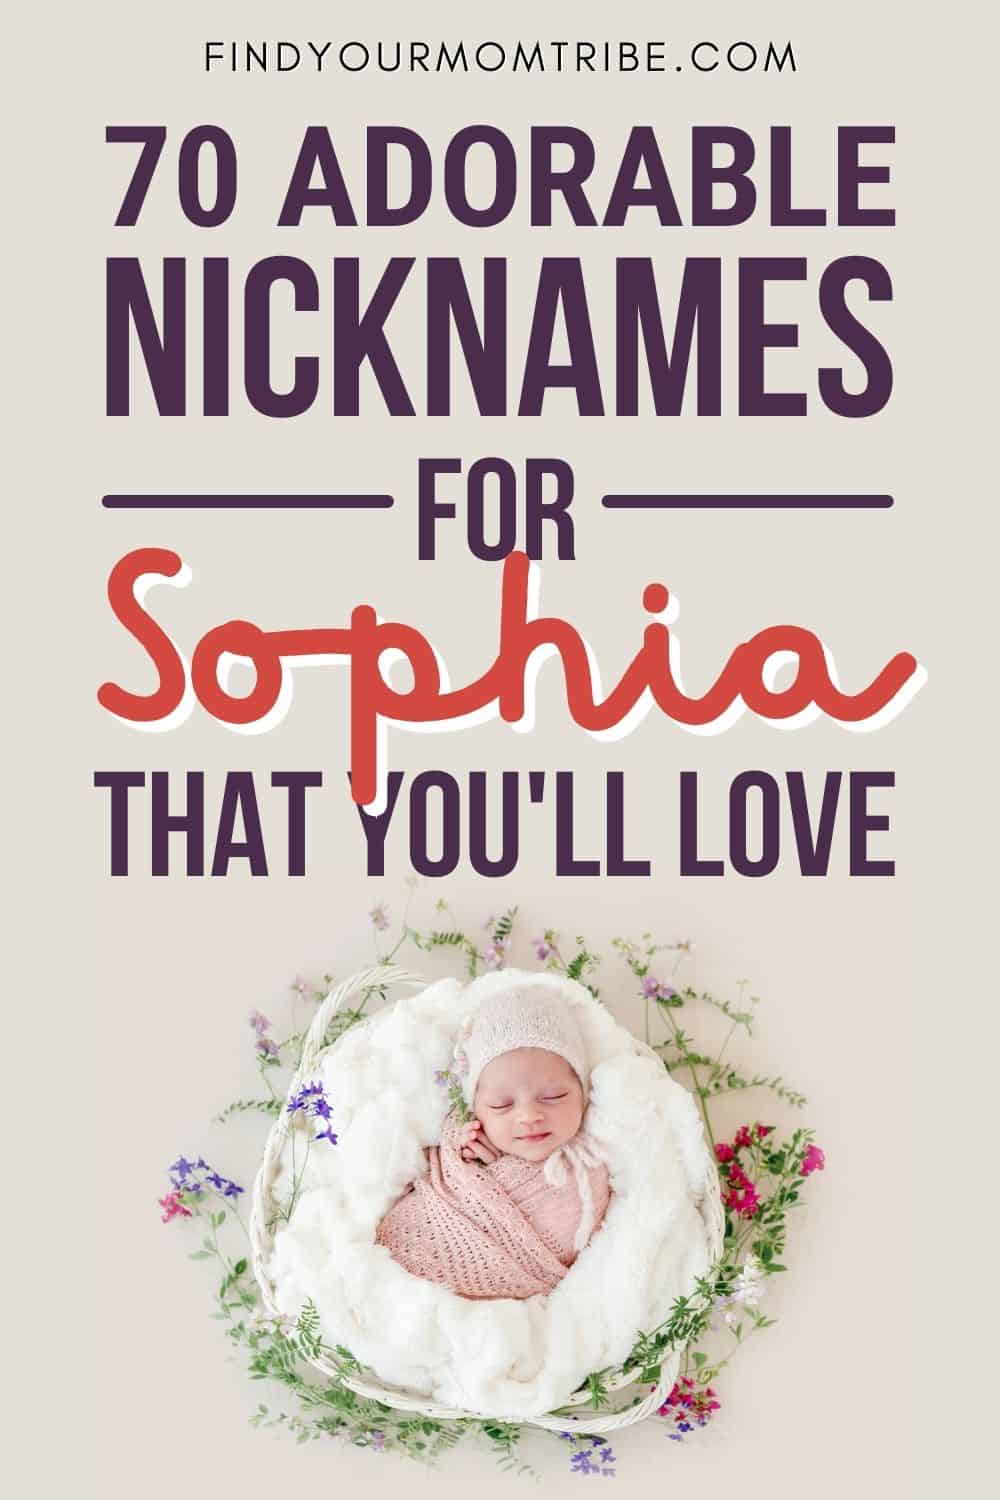 Most Adorable Nicknames For Sophia You’ll Fall In Love With Pinterest